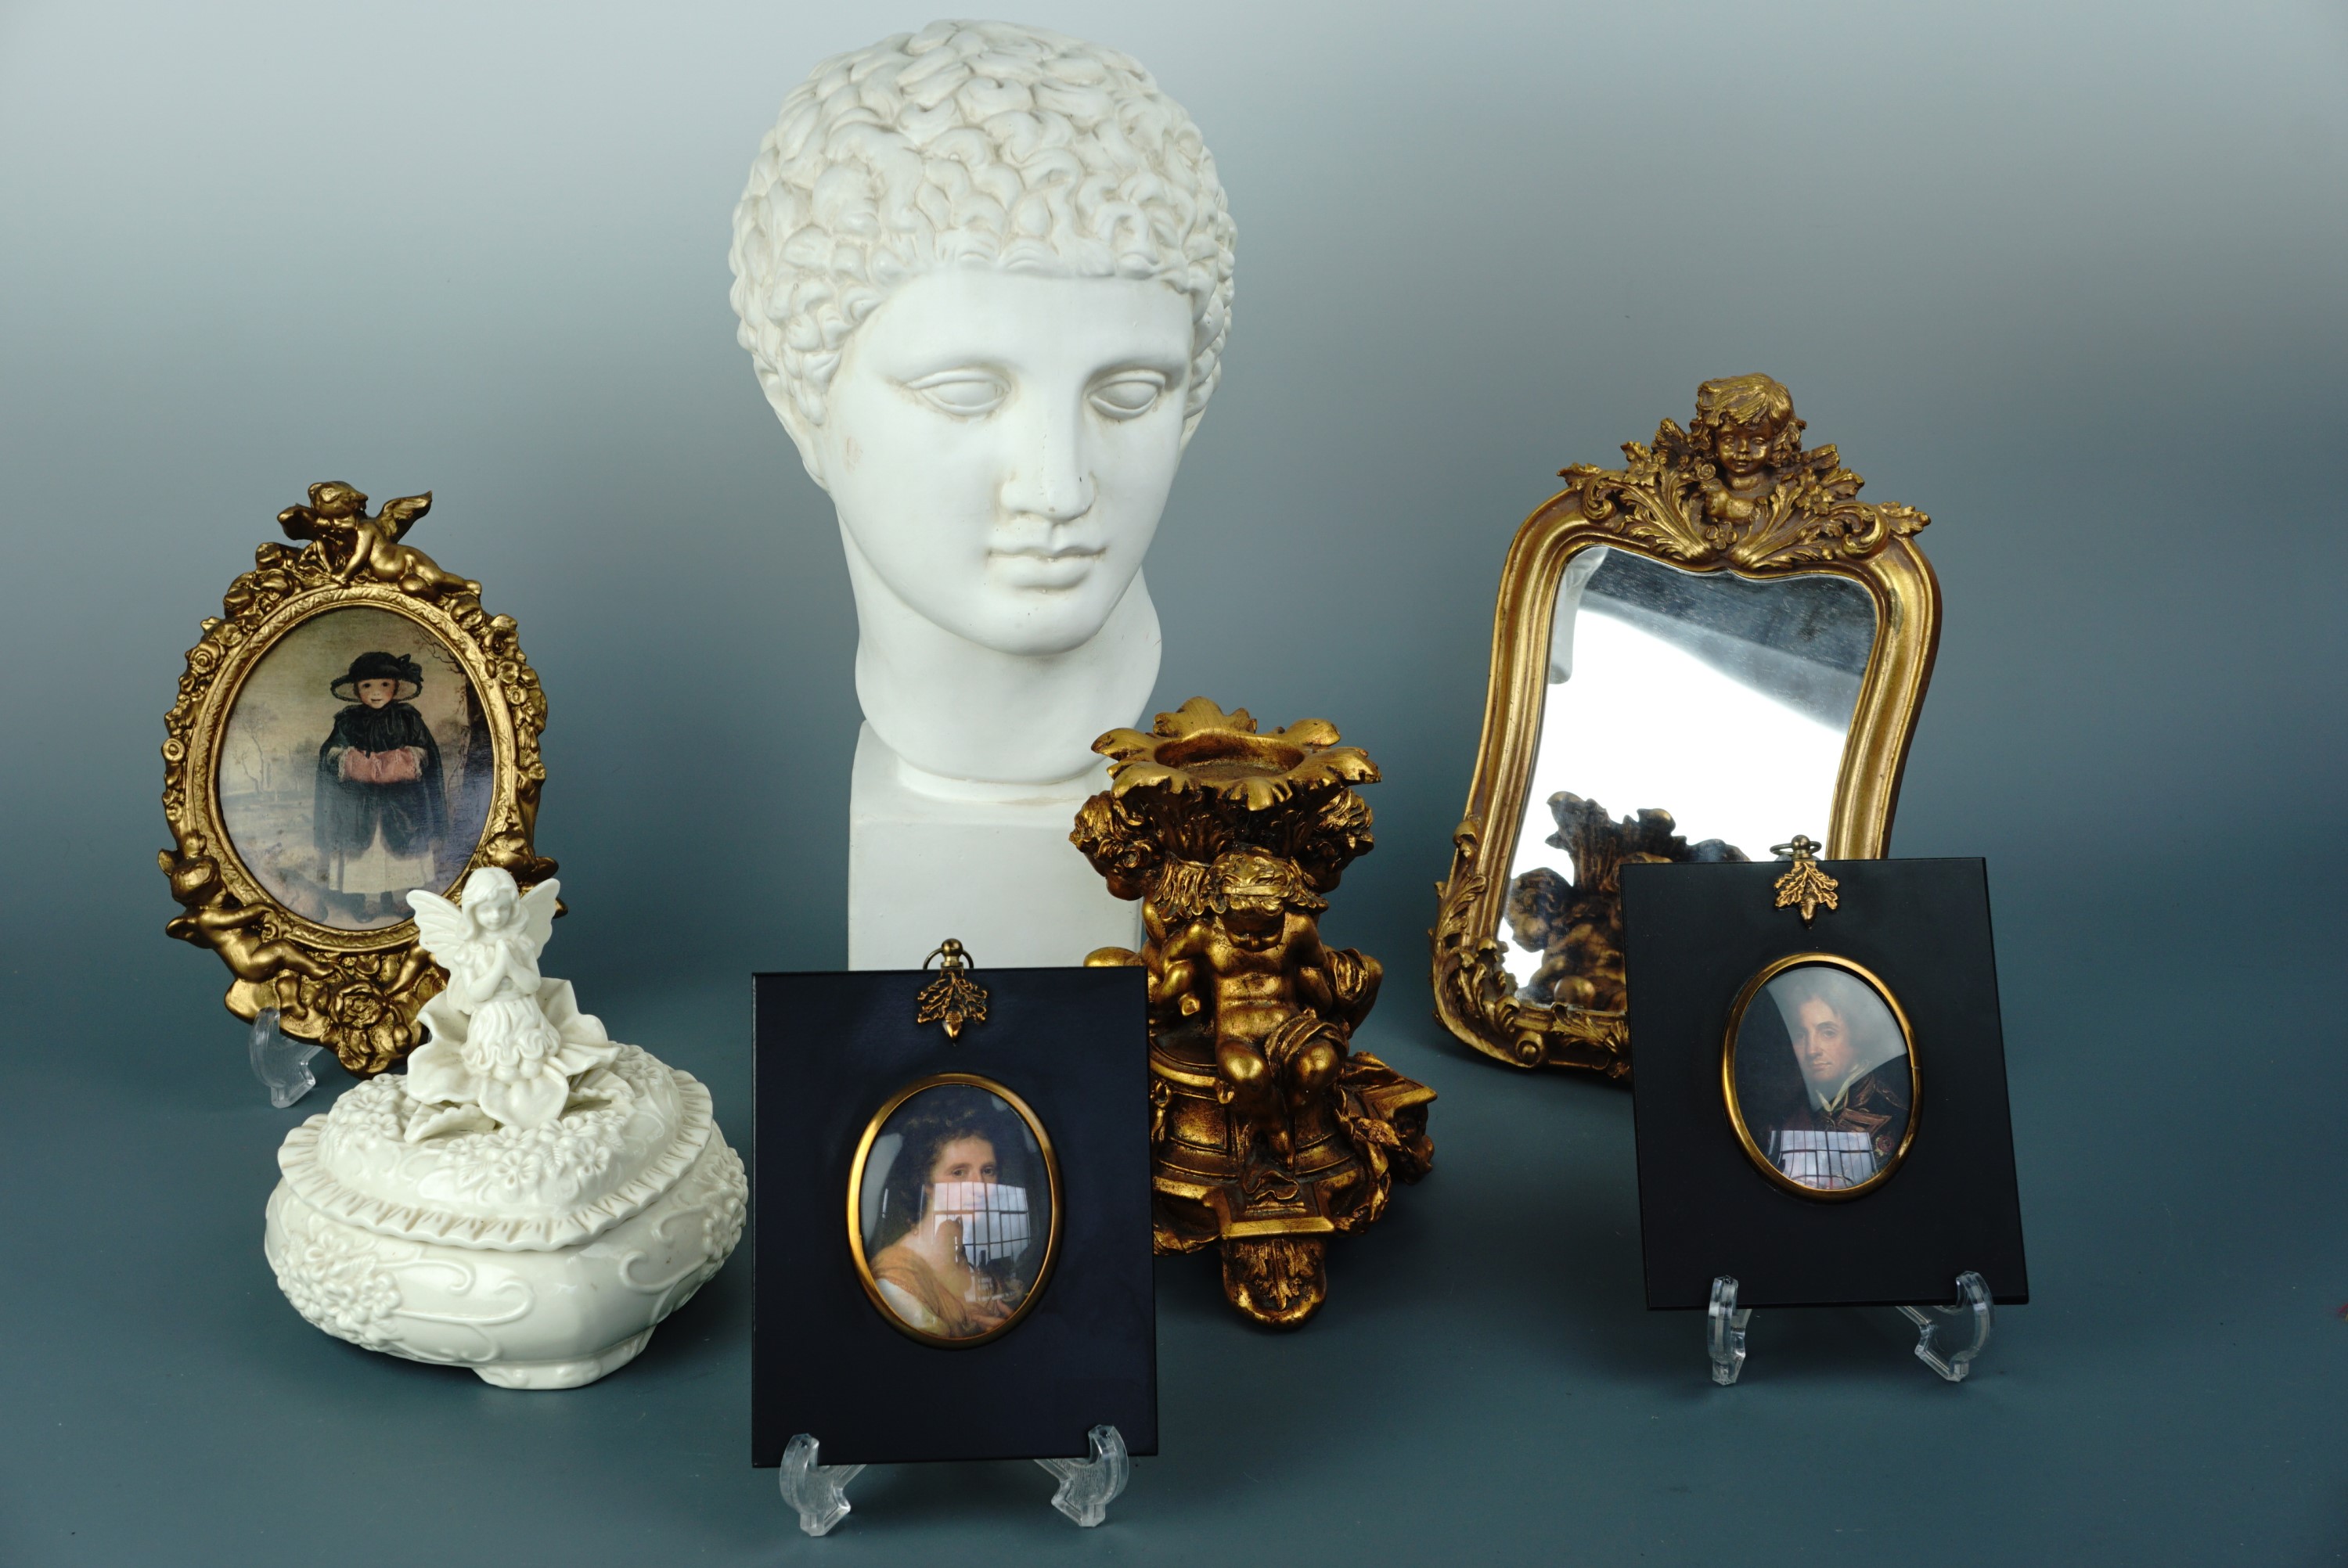 Contemporary decorative furnishing items including a reproduction classical bust, portrait